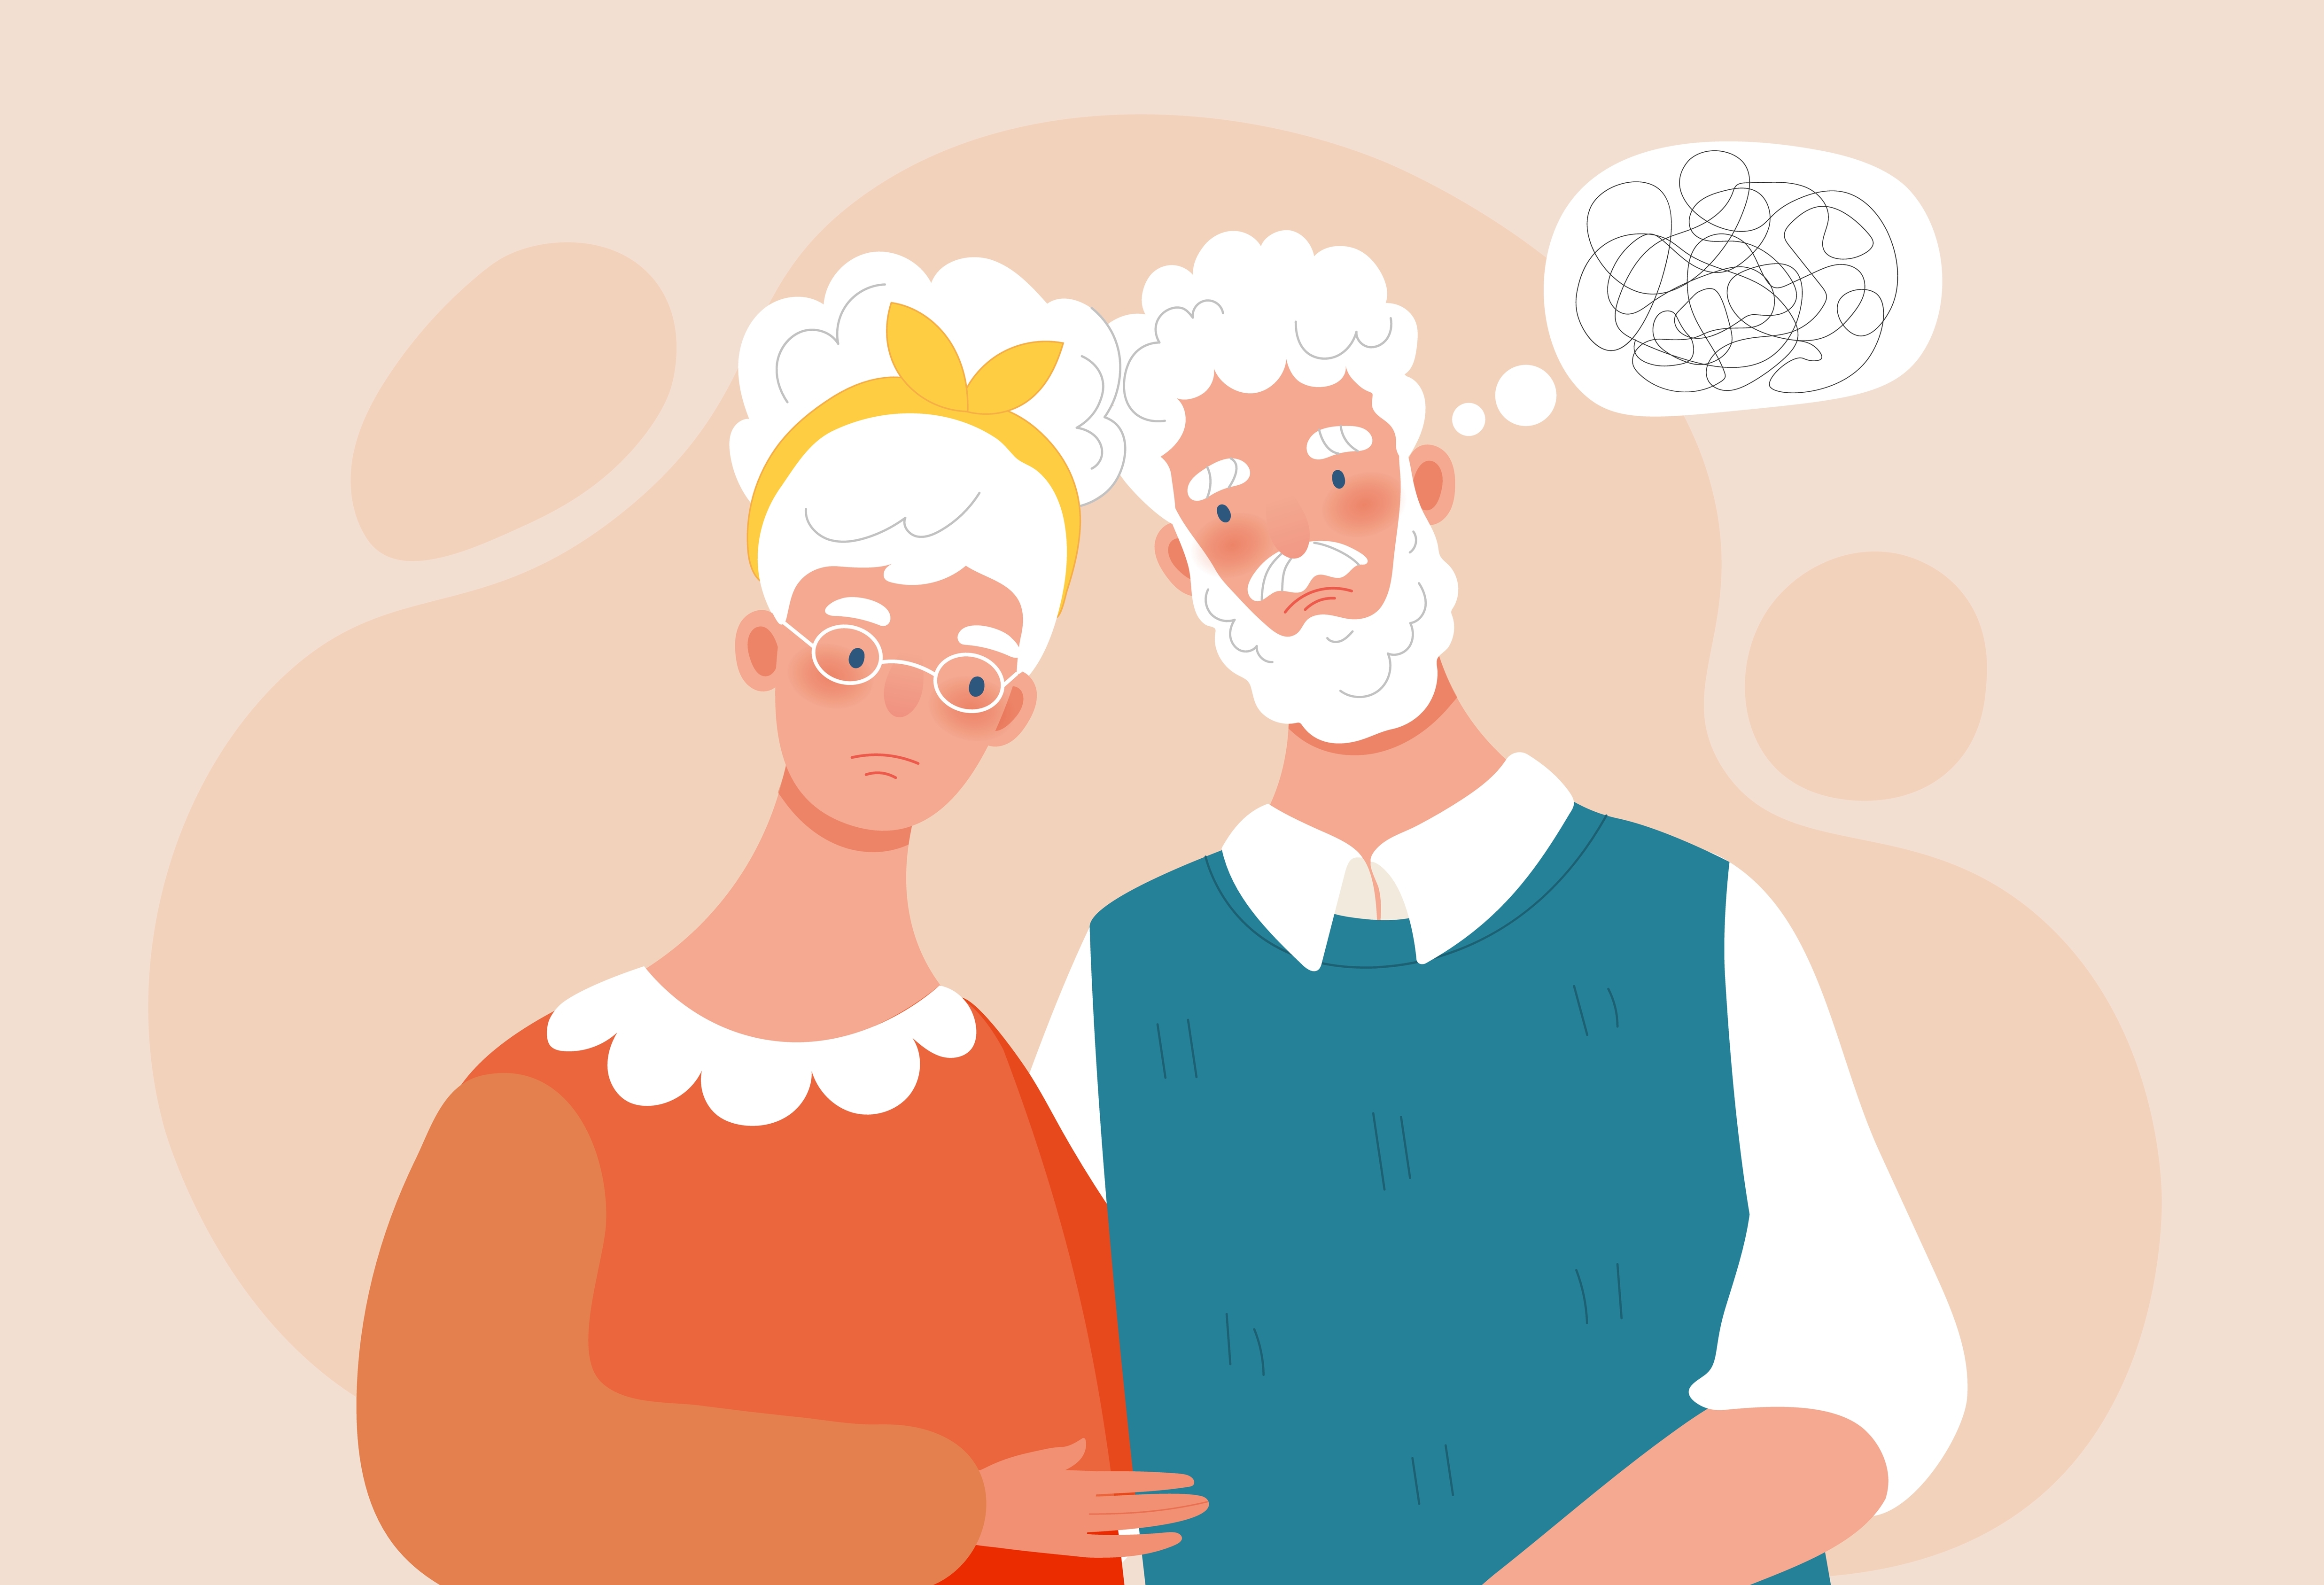 An illustration of an elderly couple standing together looking stressed.